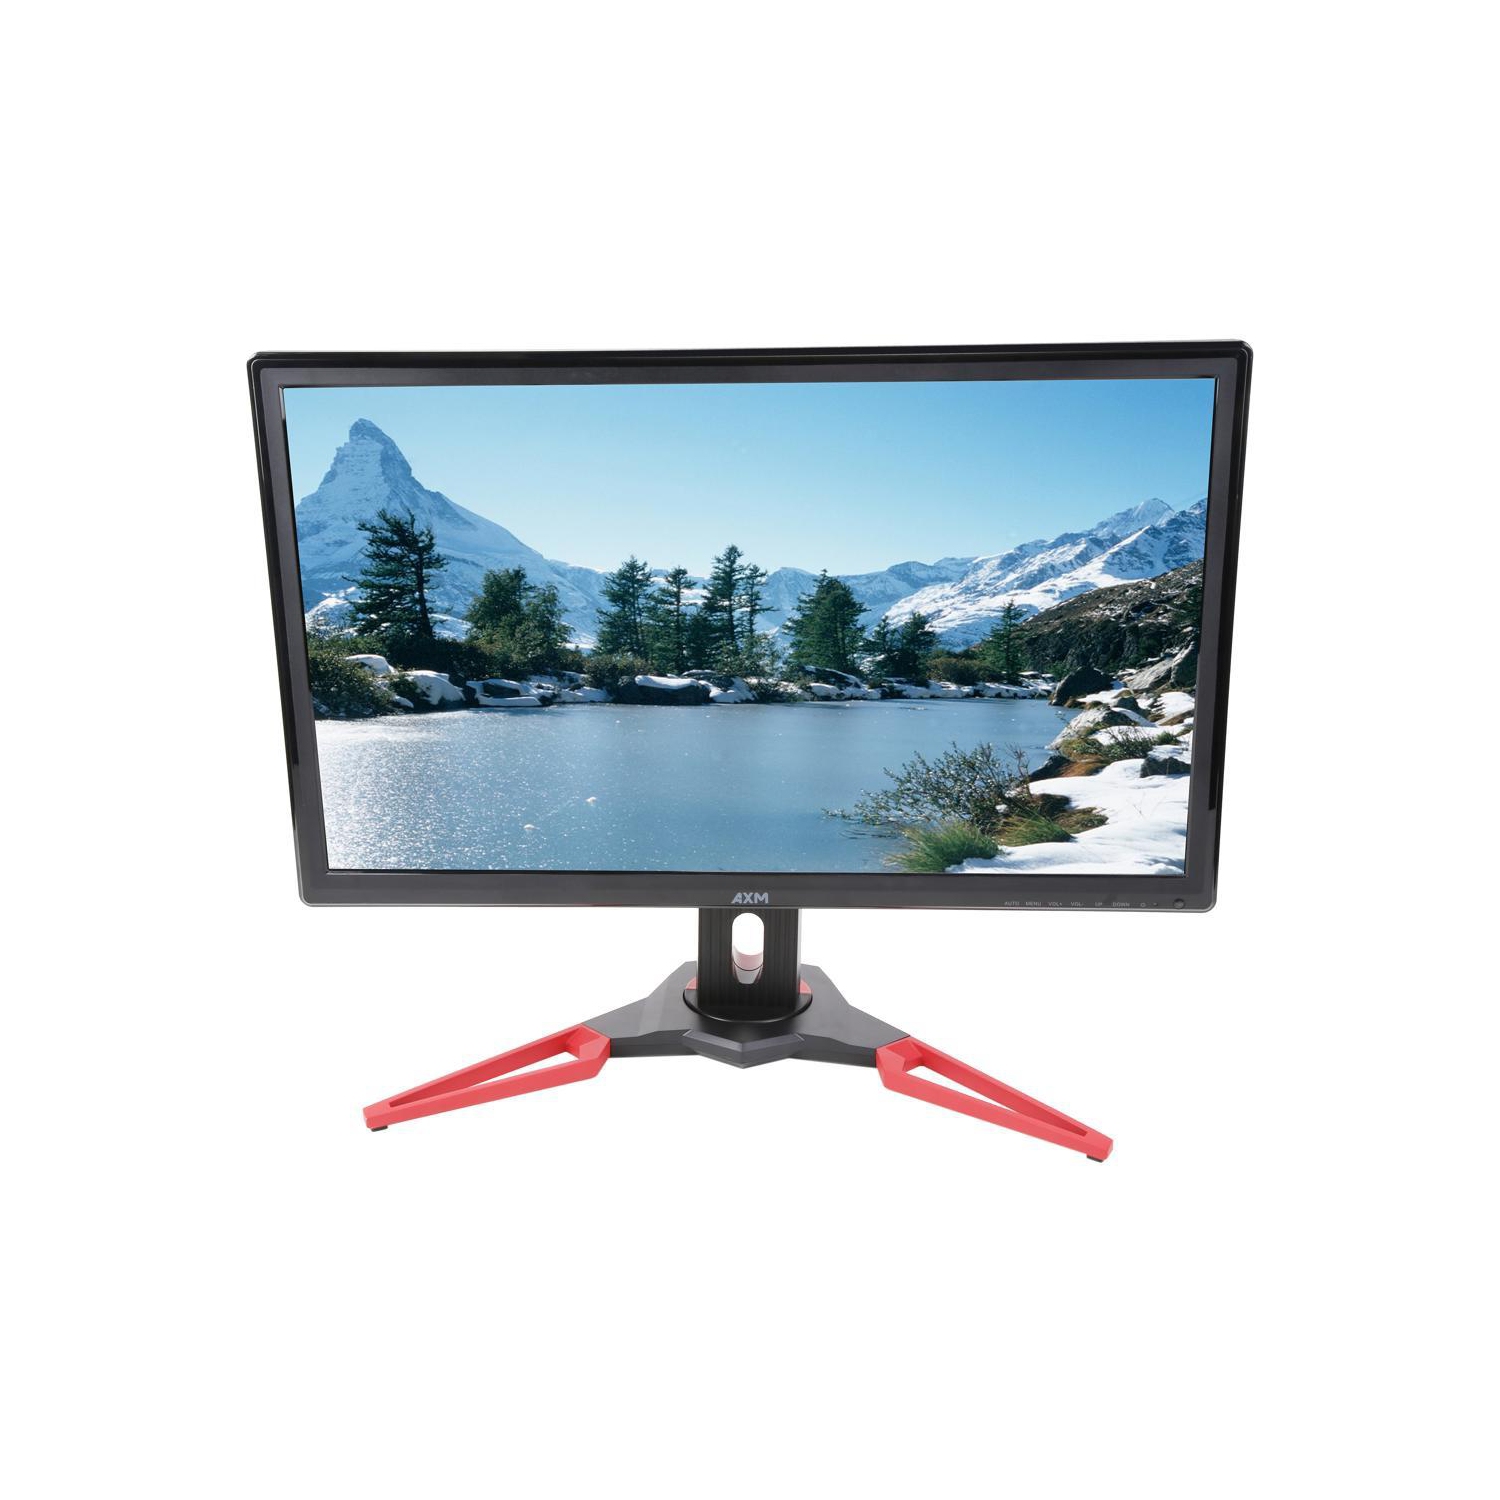 AXIOM 2768 27" WQHD IPS Gaming Monitor 2K, 2560 x 1440 Adaptive-Sync (FreeSync Compatible) Height Adjustable Stand, Display Port/ HDMI/ DVI Port, with Speaker